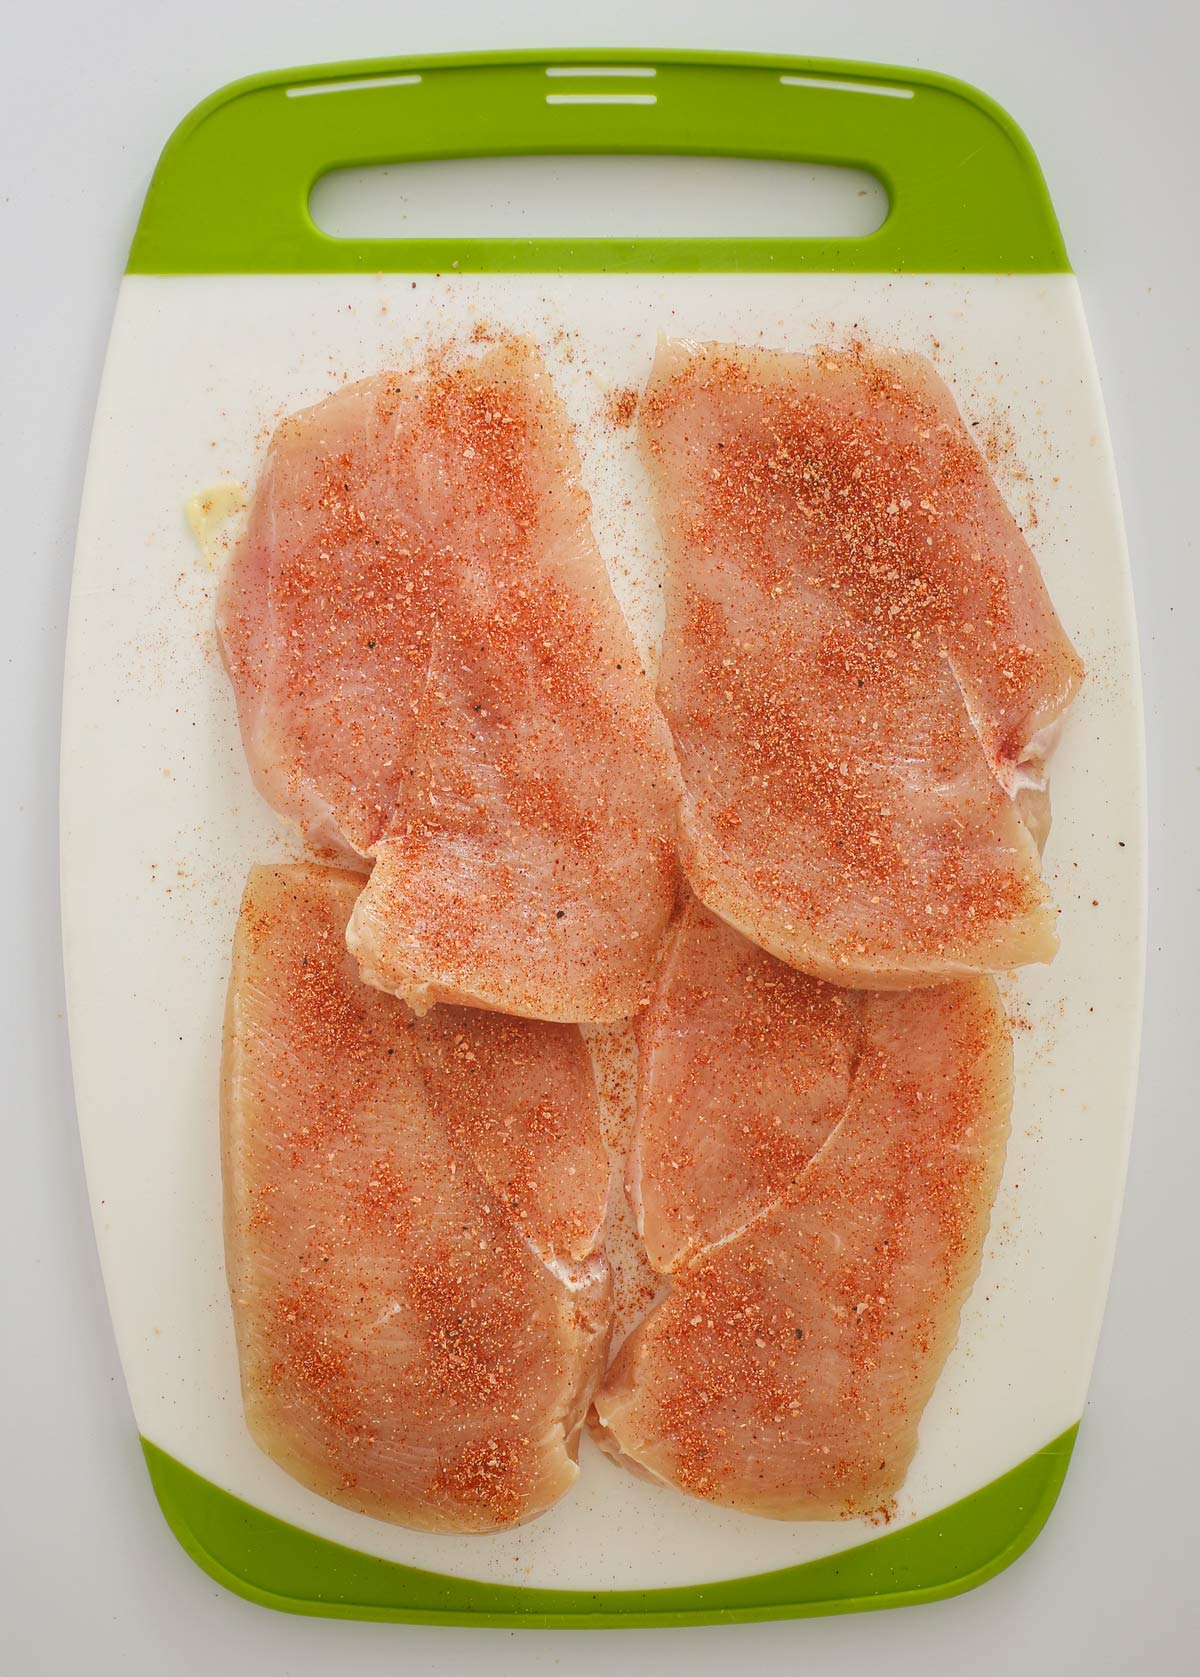 chicken breasts cut into fillets or cutlets.